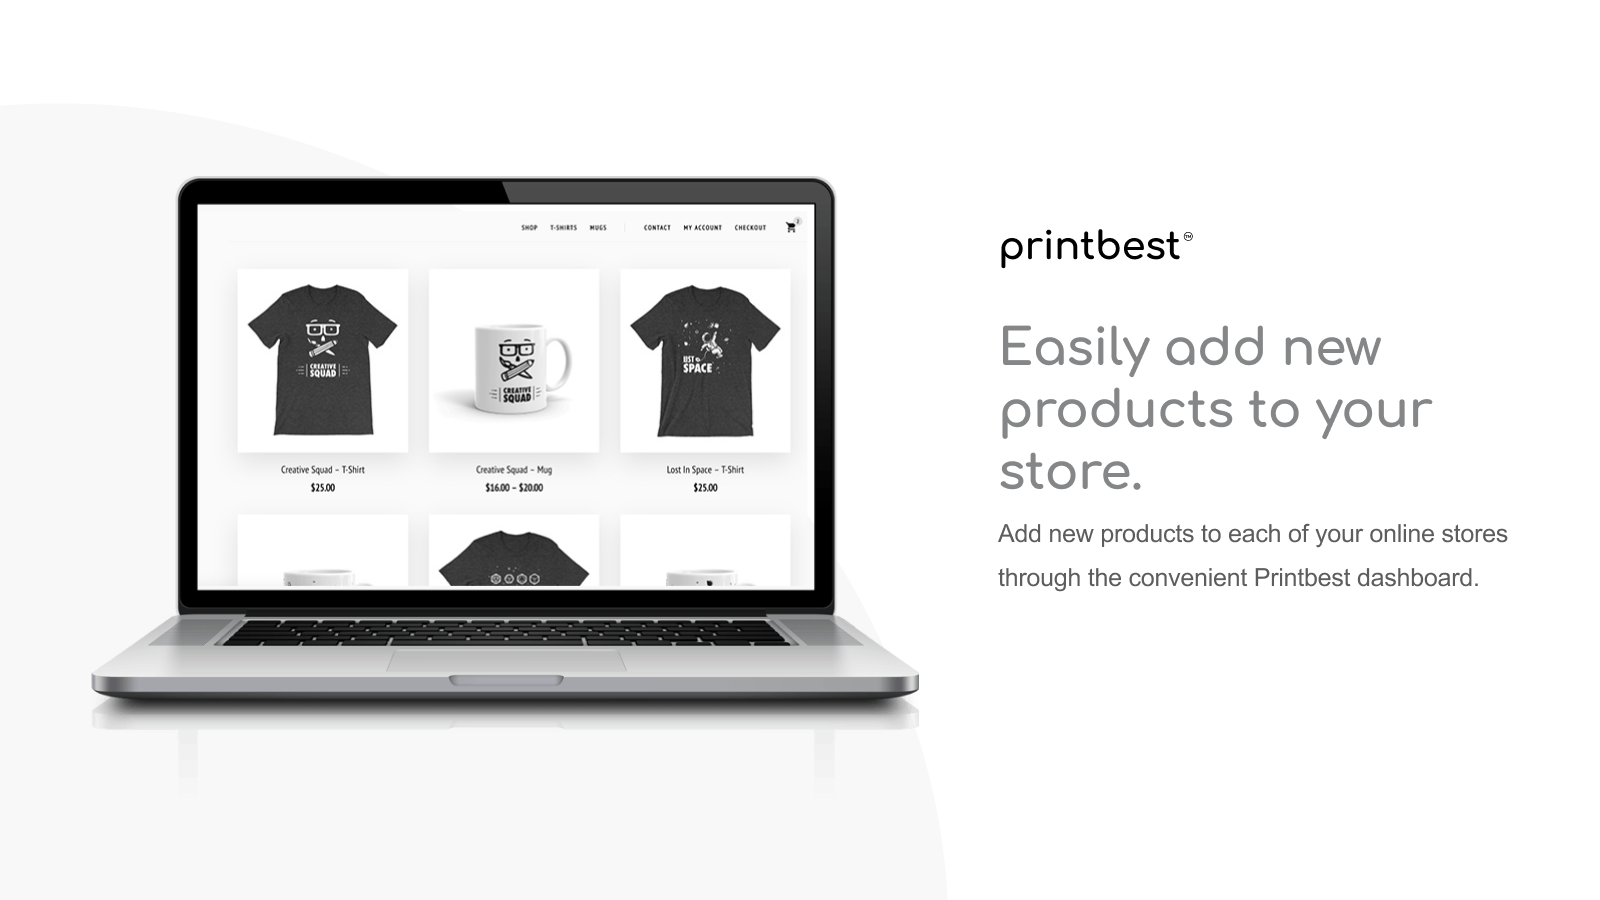 Easily add new products to your store